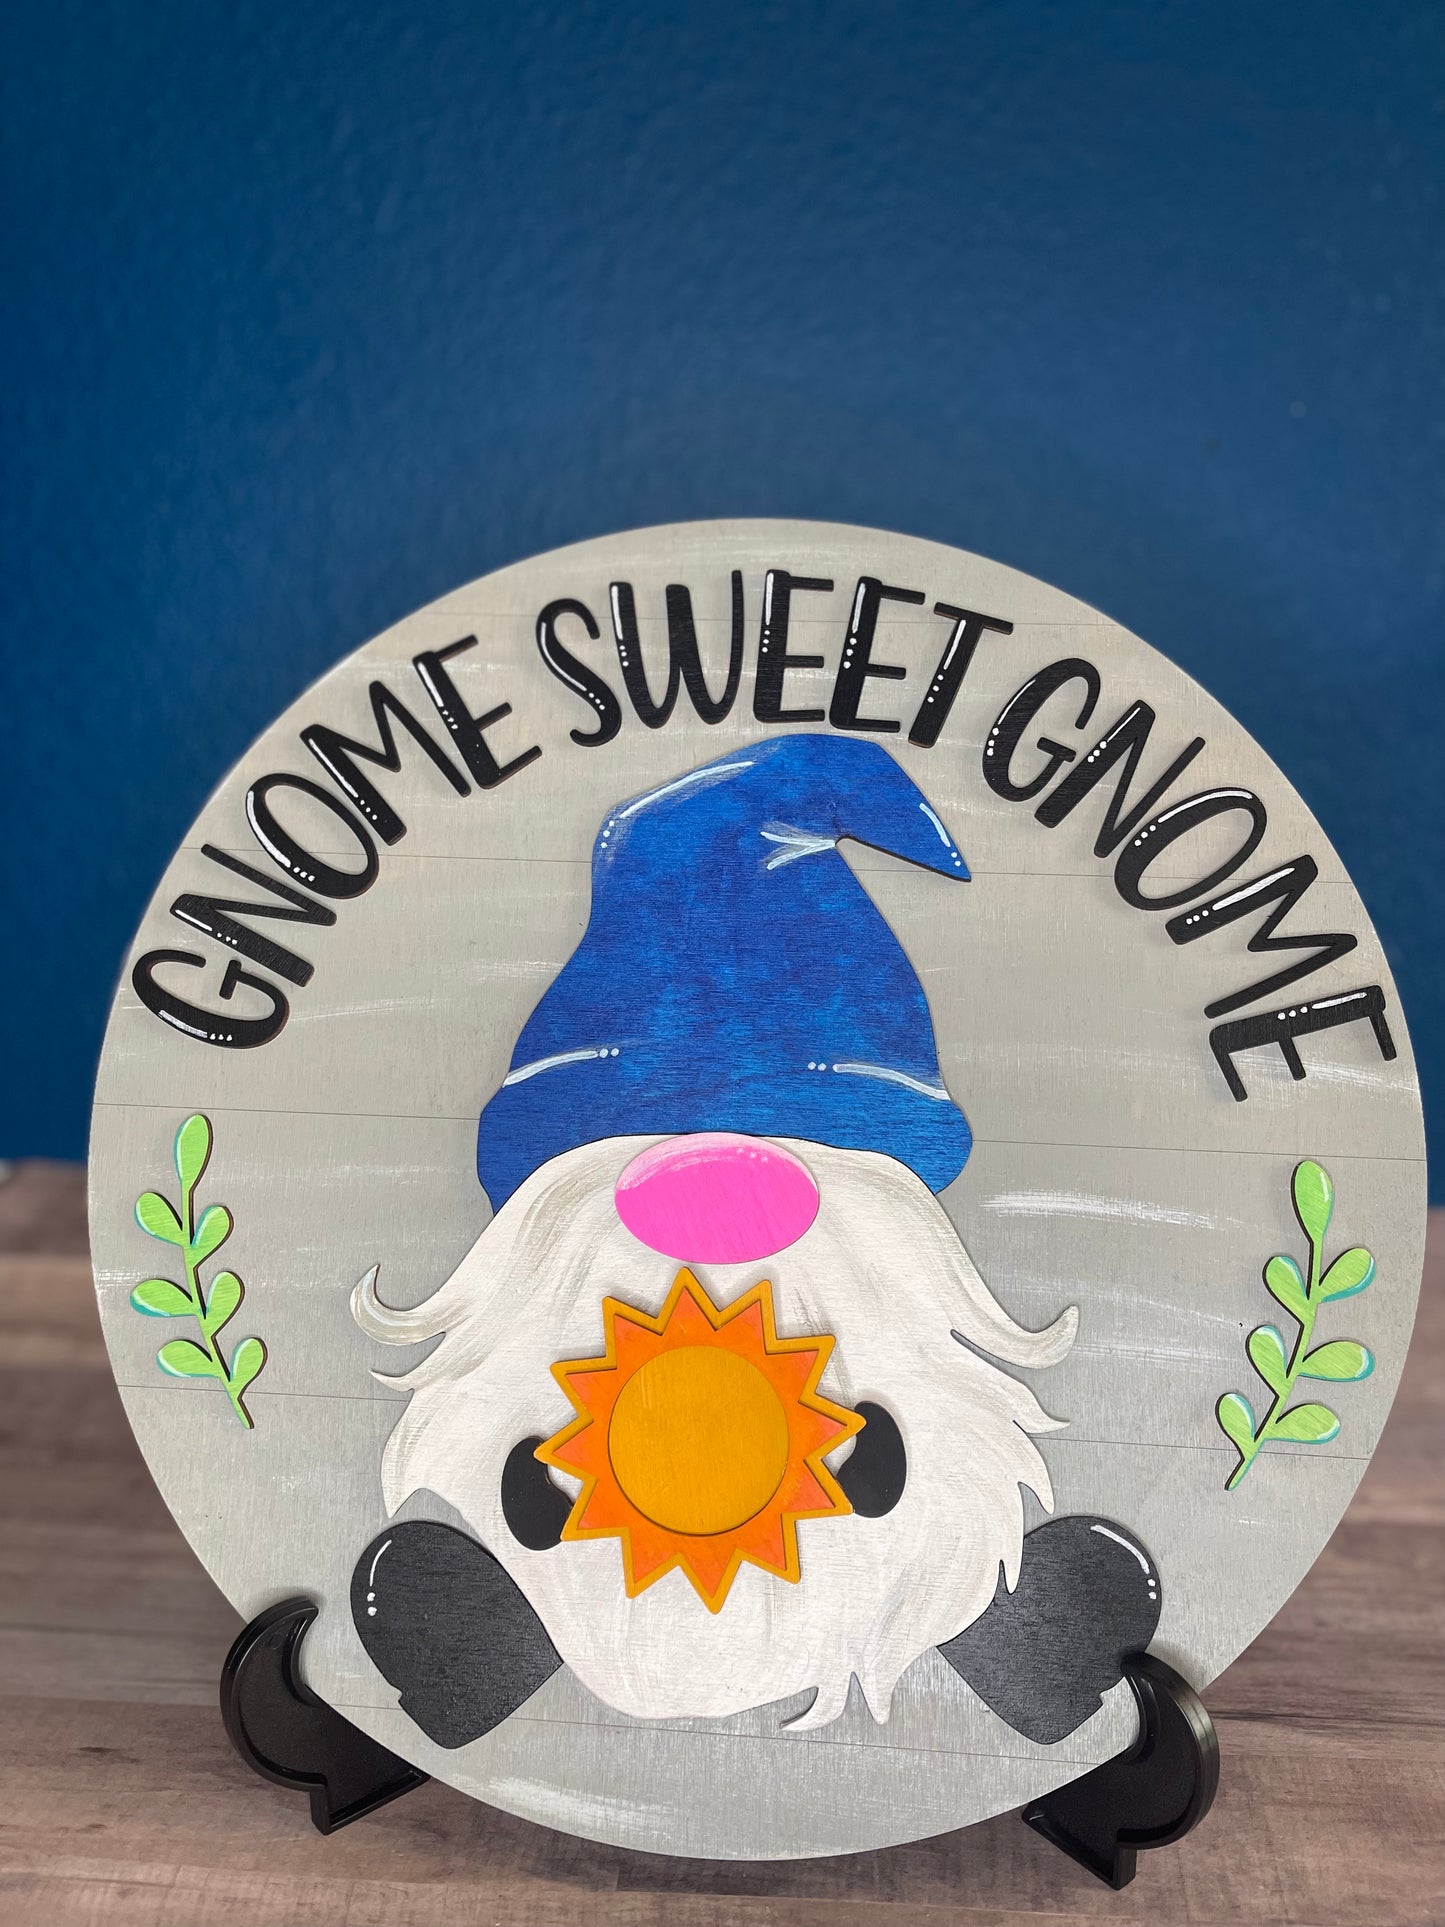 Gnome Sweet Gnome interchangeable sign